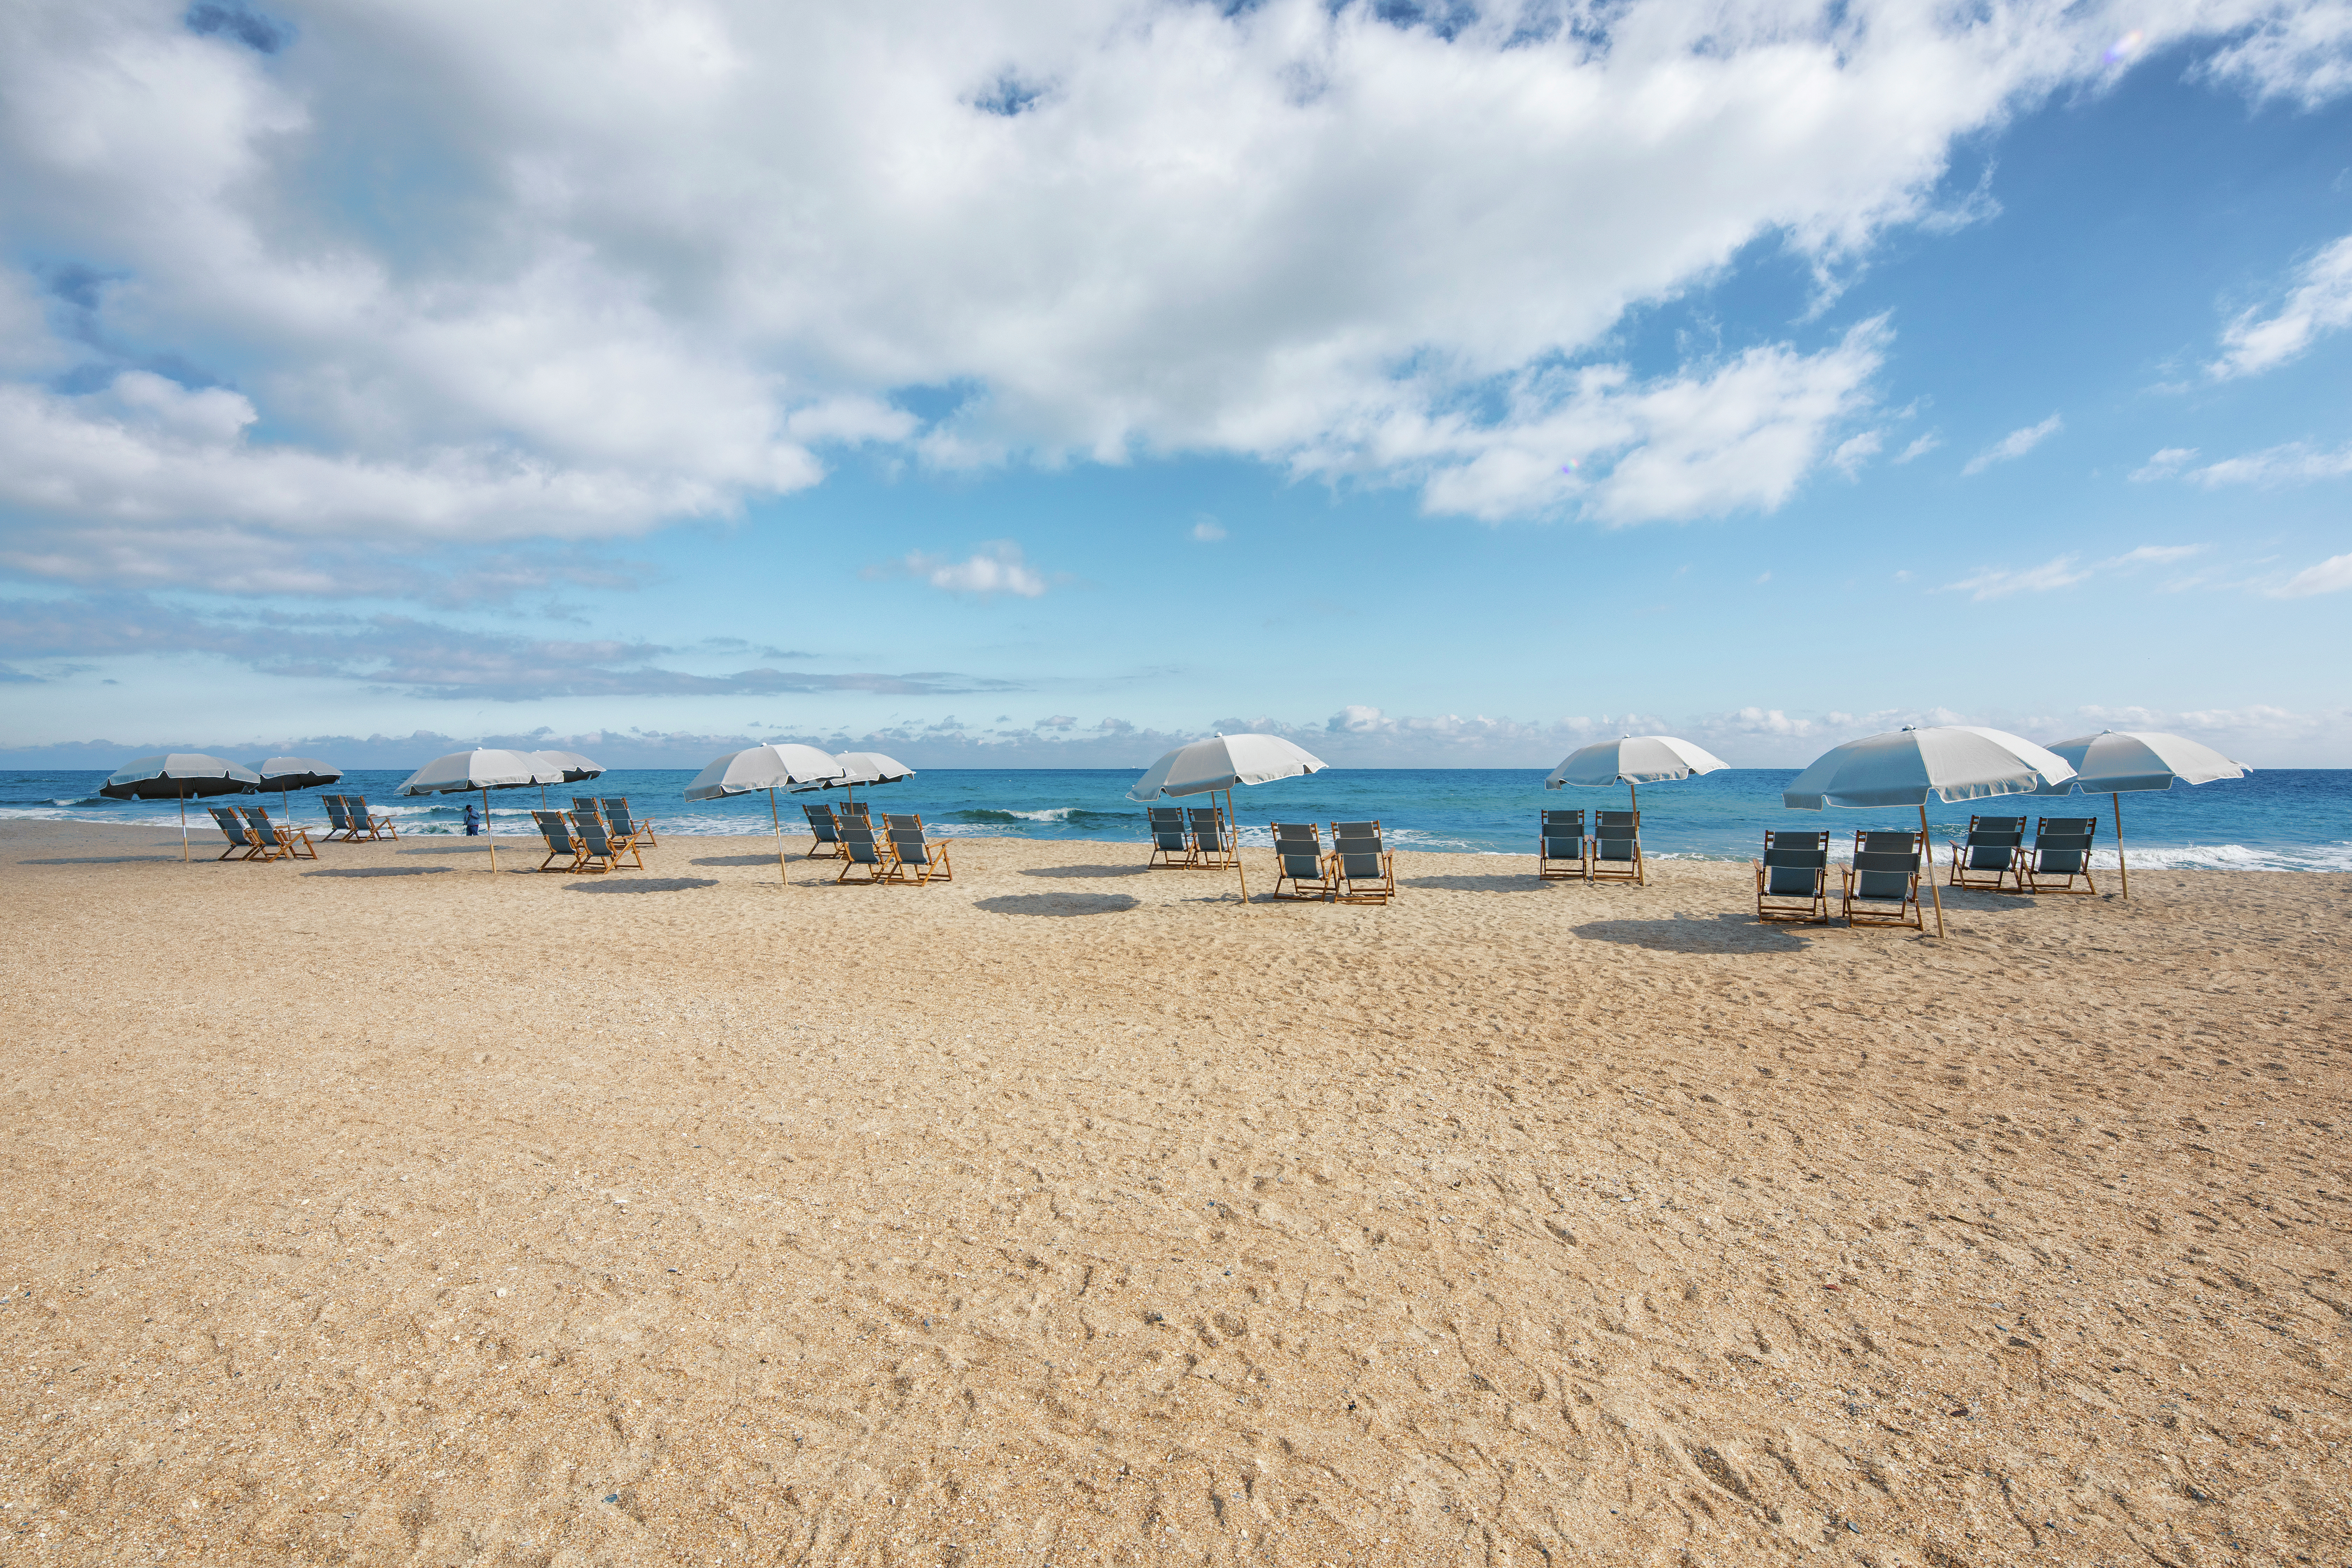 Ocean View, Sun Umbrellas, and Chairs Set Up on Beach 